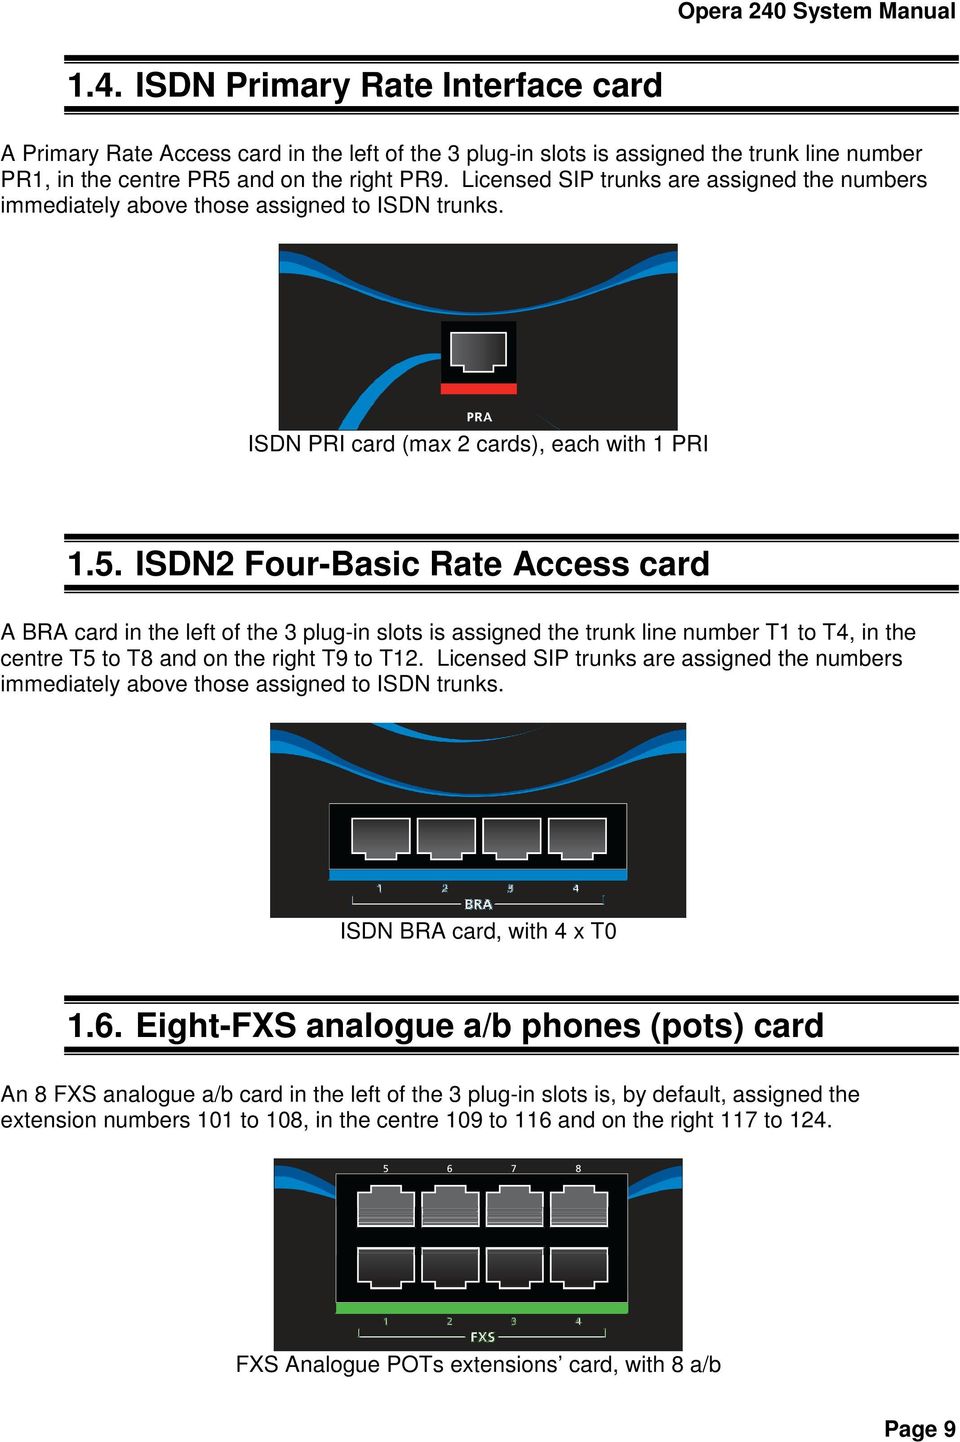 ISDN2 Four-Basic Rate Access card A BRA card in the left of the 3 plug-in slots is assigned the trunk line number T1 to T4, in the centre T5 to T8 and on the right T9 to T12.